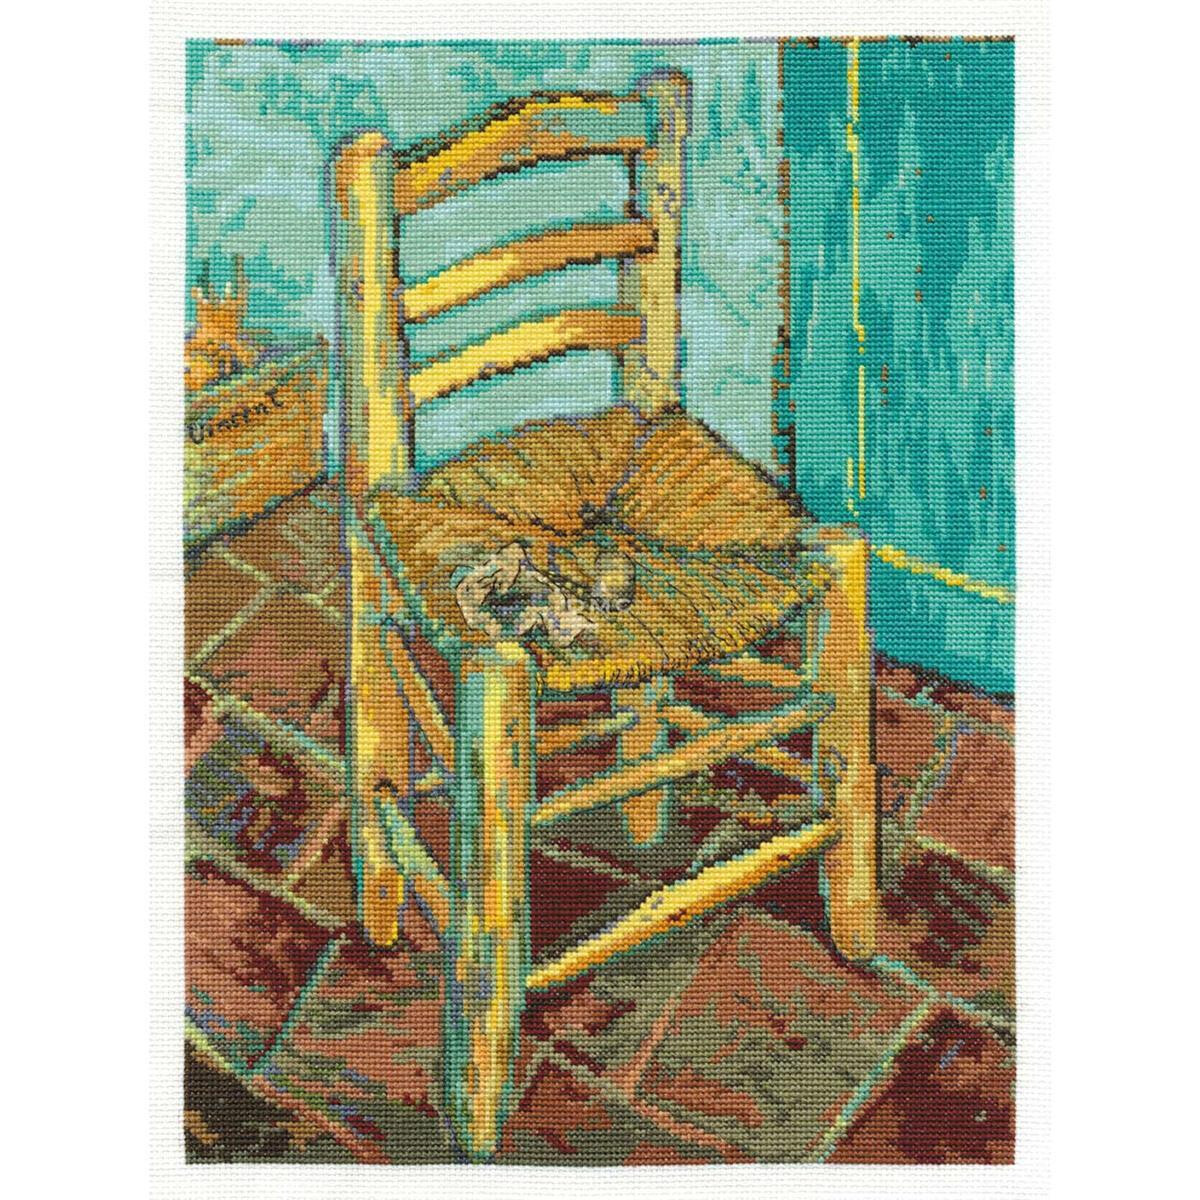 DMC counted Cross Stitch kit "Chair after Vincent...